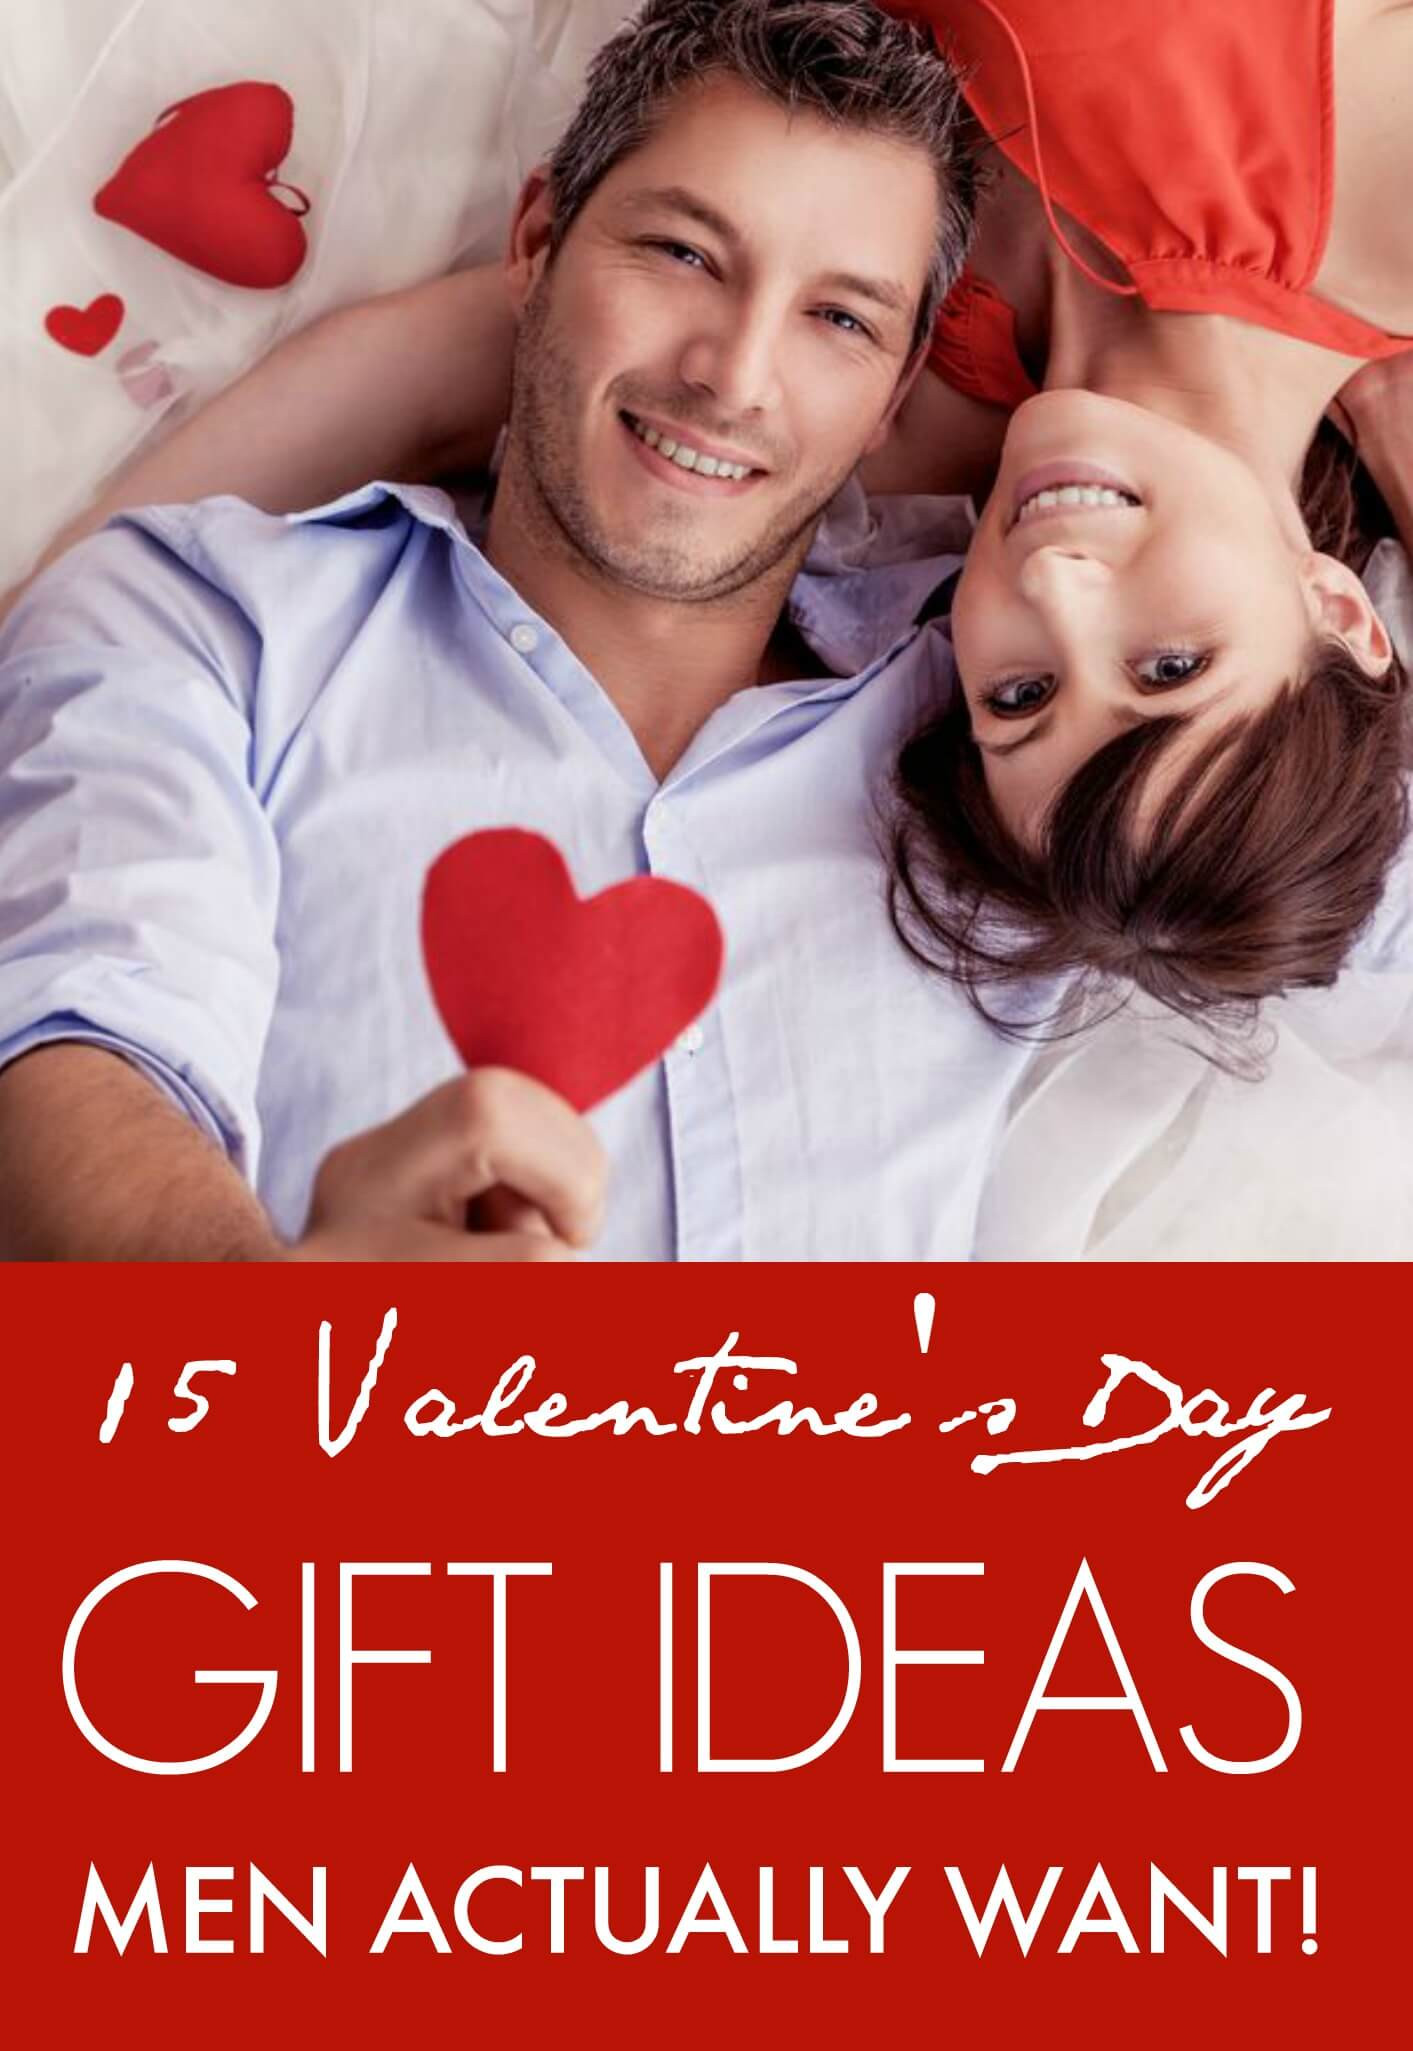 Valentines Gift Ideas Men
 15 Valentine’s Day Gift ideas Men Actually Want